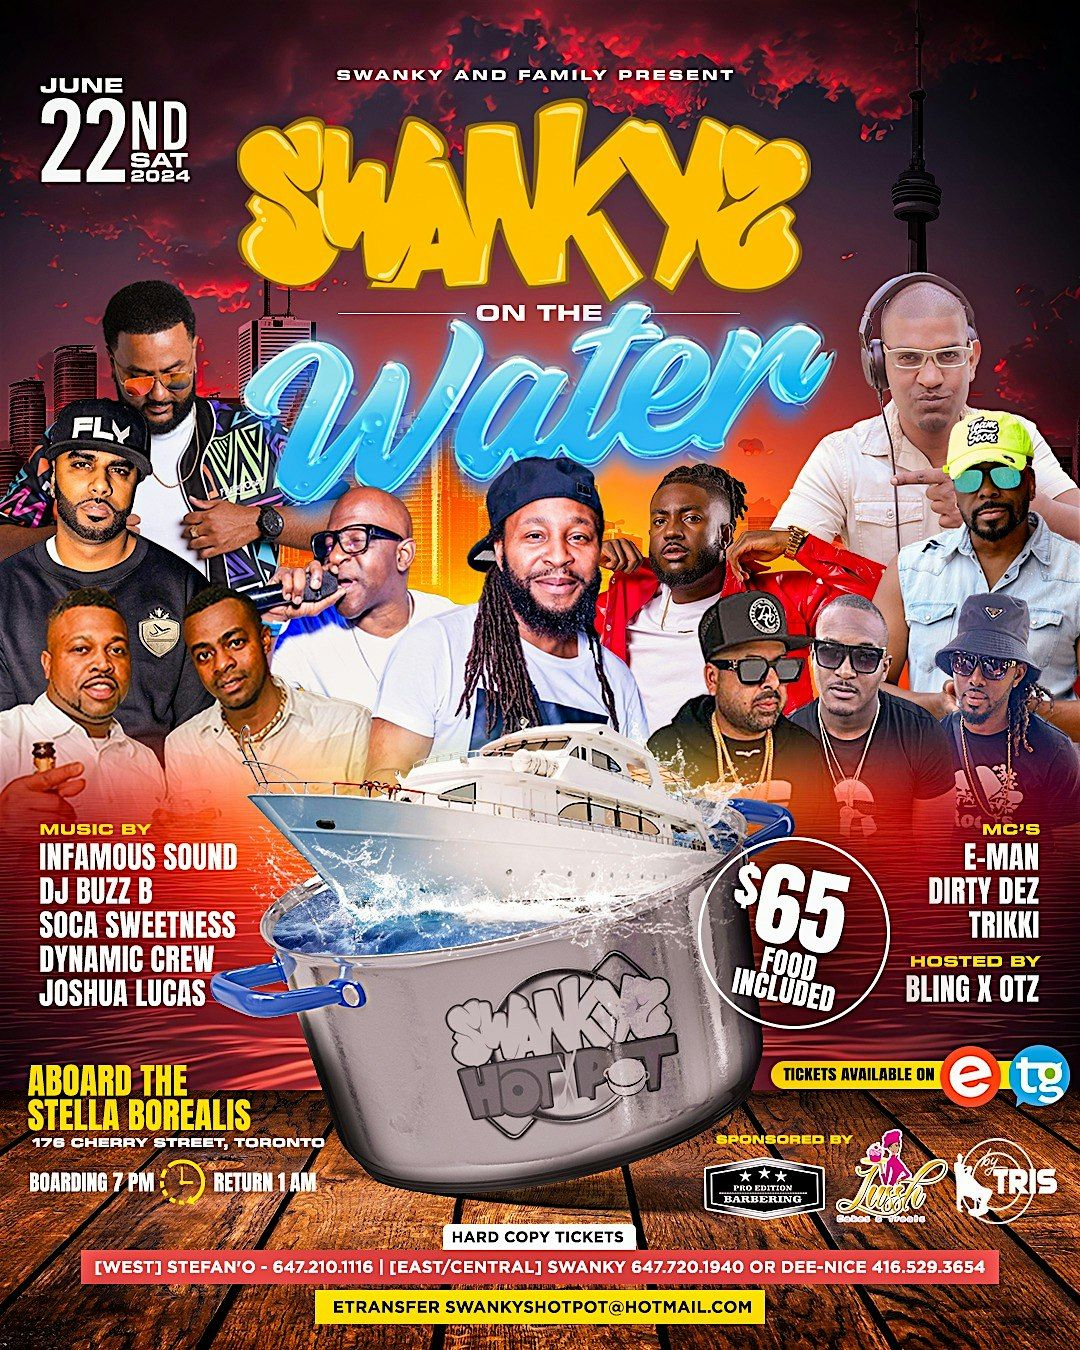 SWANKY'S ON THE WATER